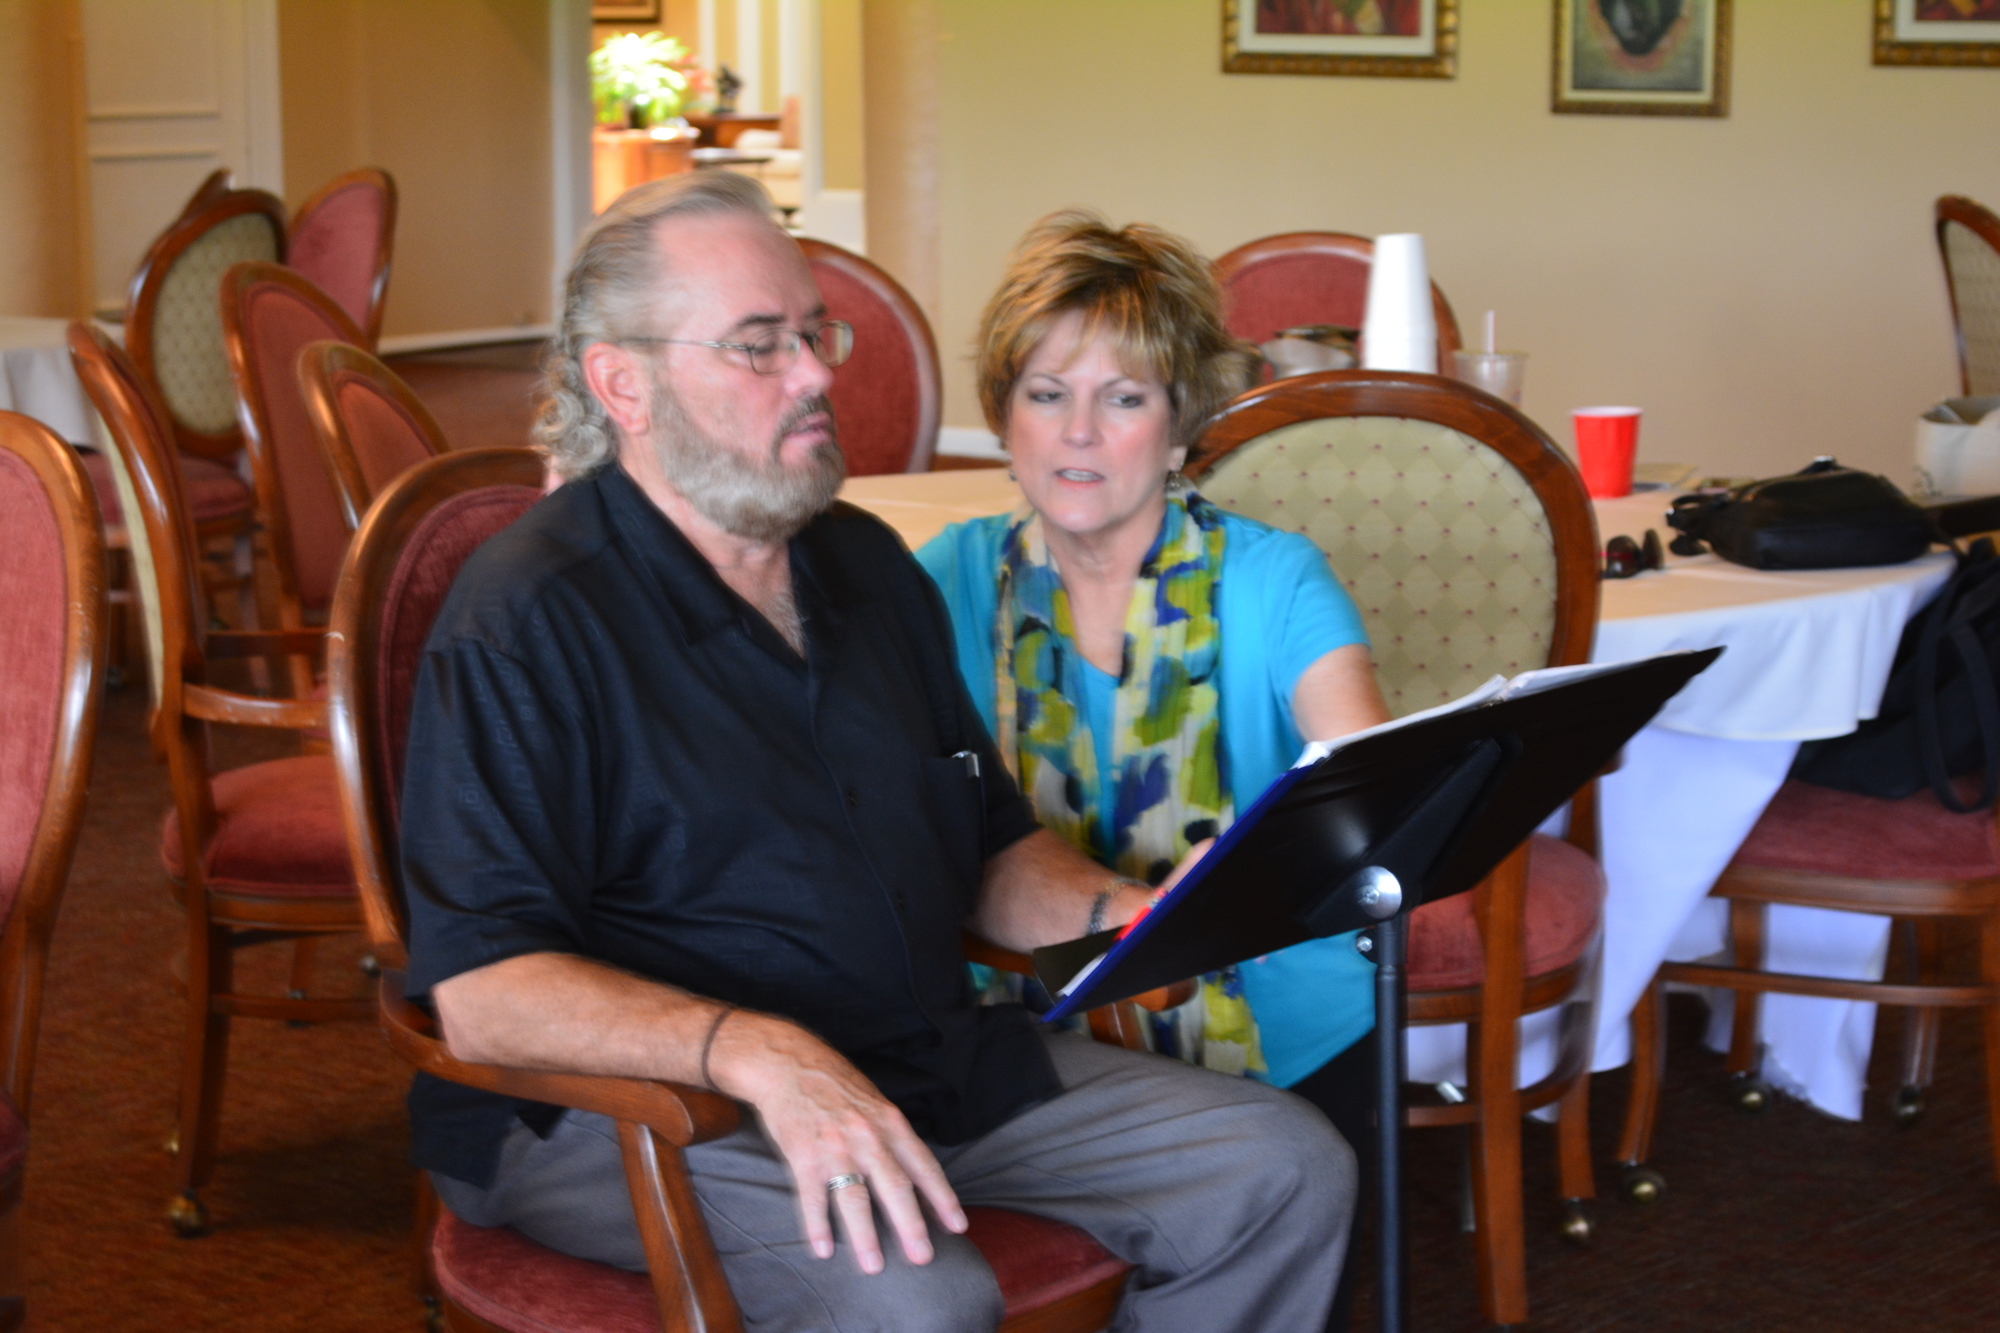 Randy Locke and Carol Sparrow will bring opera to life on July 29-30 at Palm Aire Country Club.